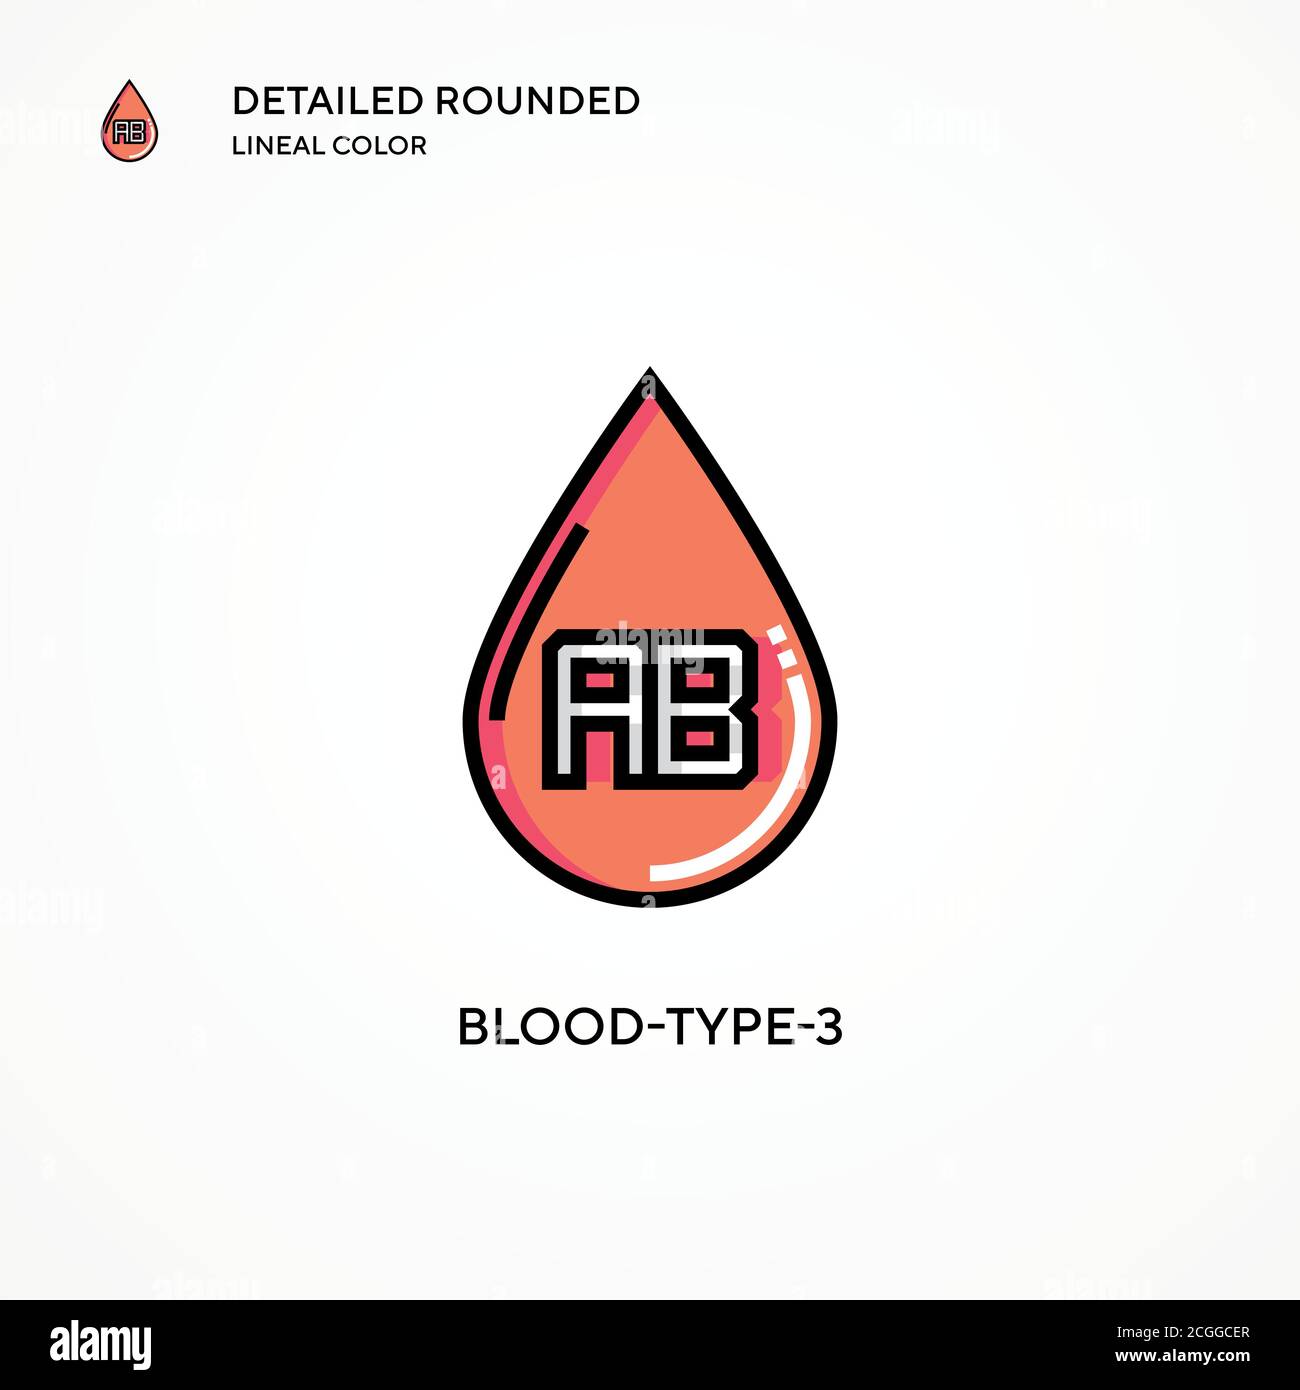 Blood-type-3 vector icon. Modern vector illustration concepts. Easy to edit and customize. Stock Vector